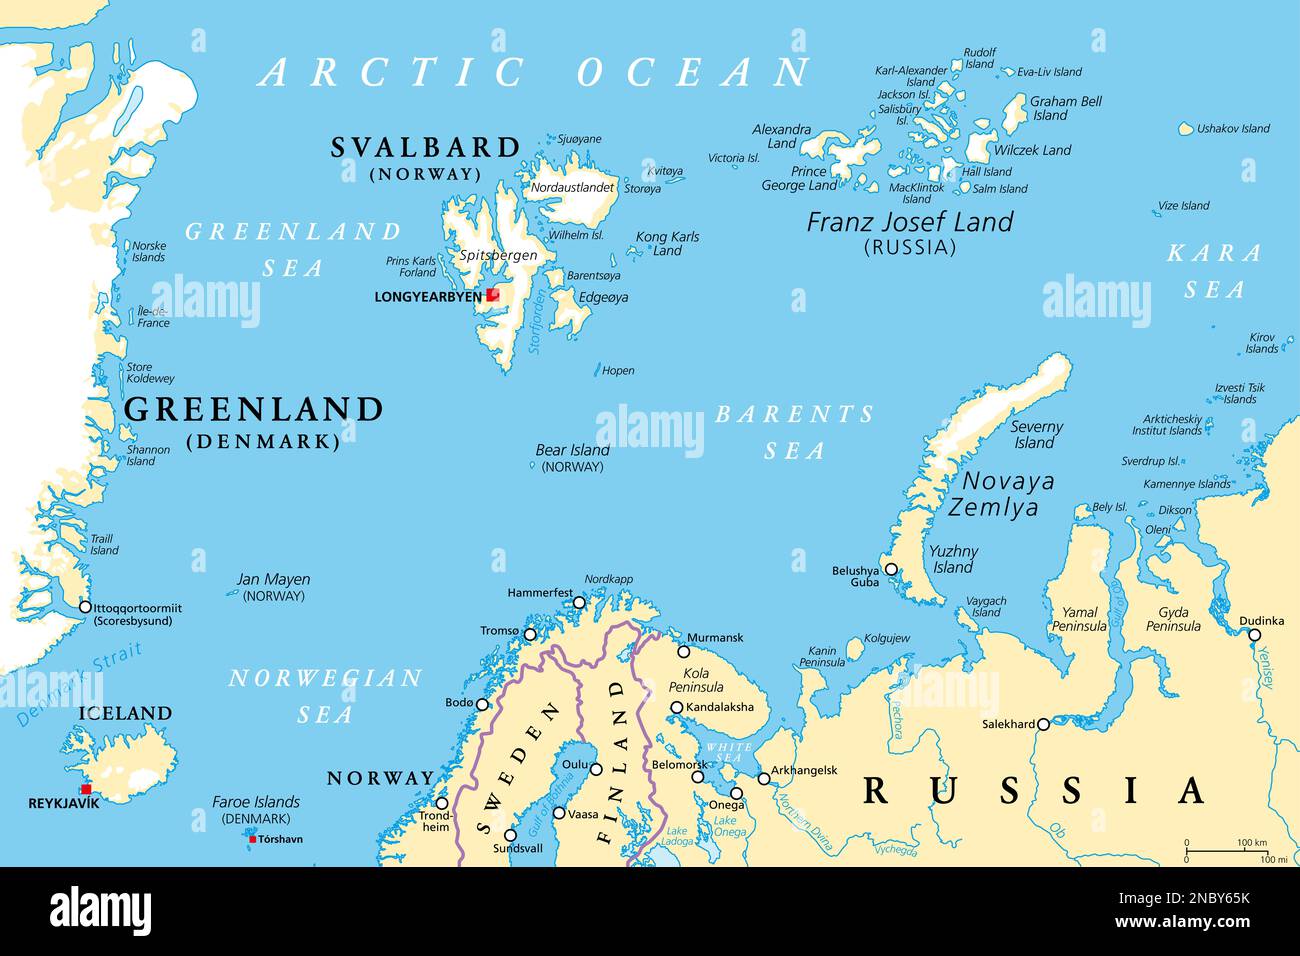 Arctic Ocean region north of mainland Europe, political map. From the eastern part of Greenland to Svalbard to Franz Josef Land. Stock Photo